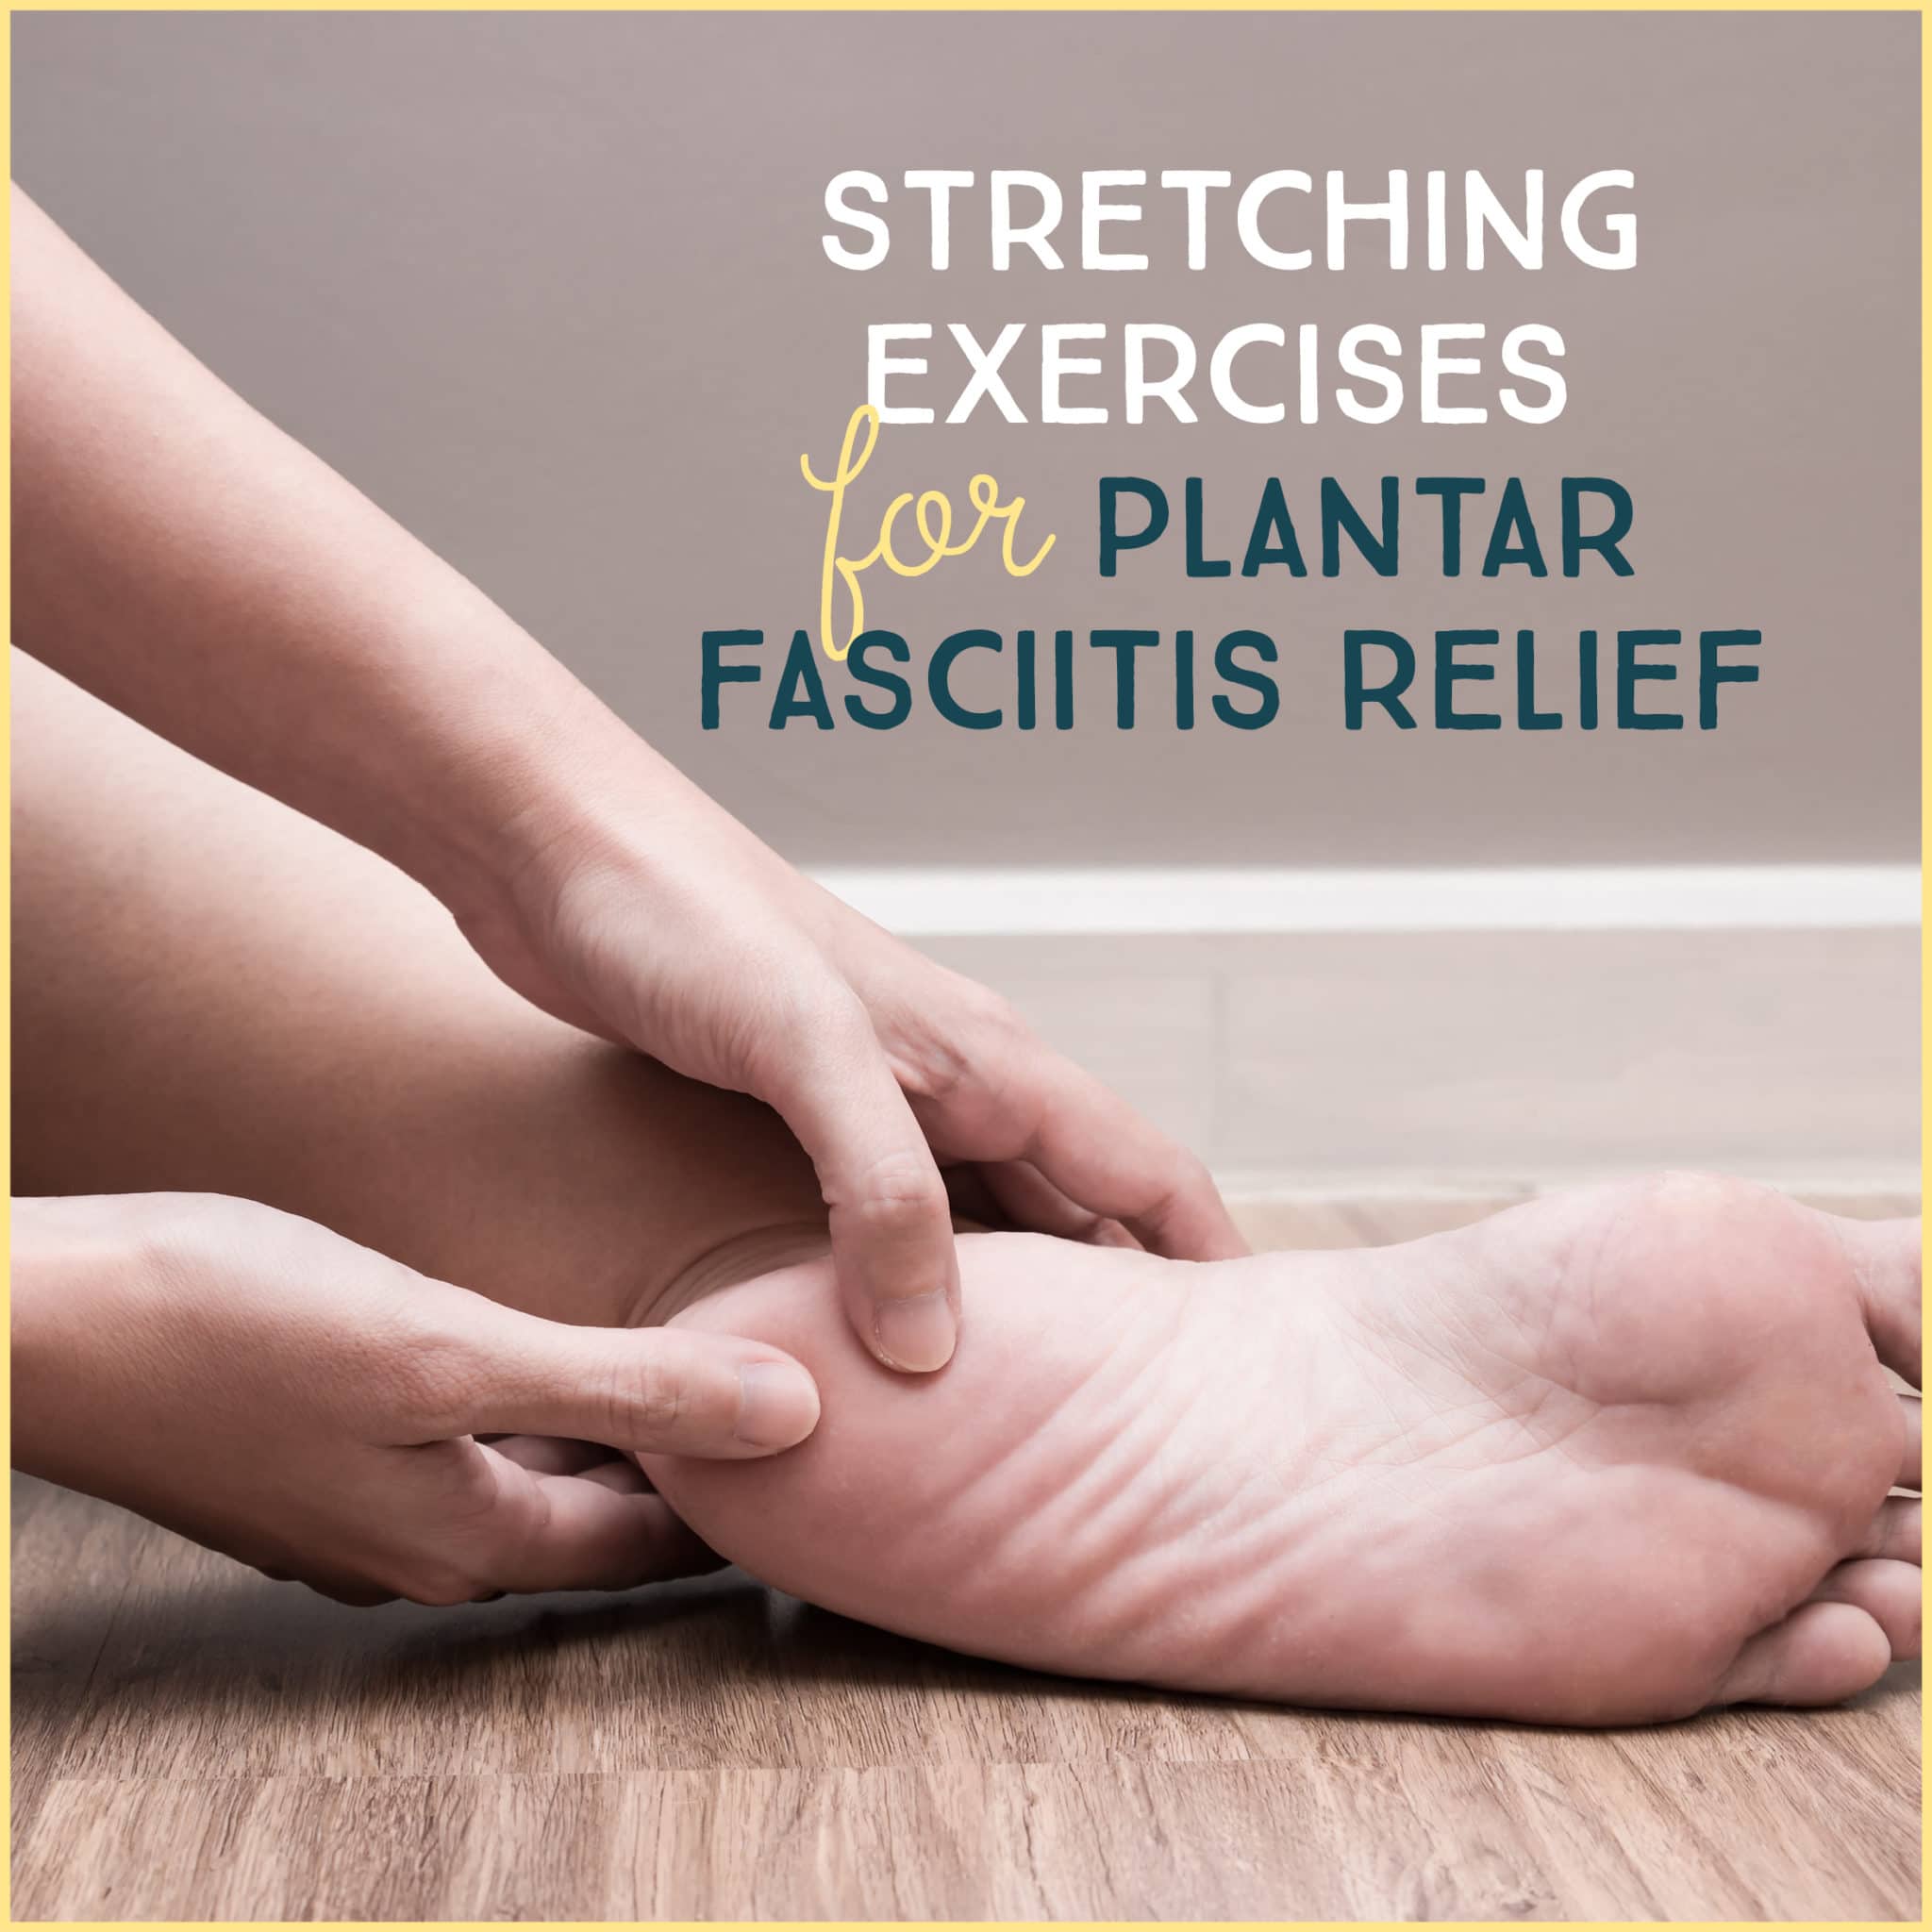 9 foot exercises: For strengthening, flexibility, and pain relief